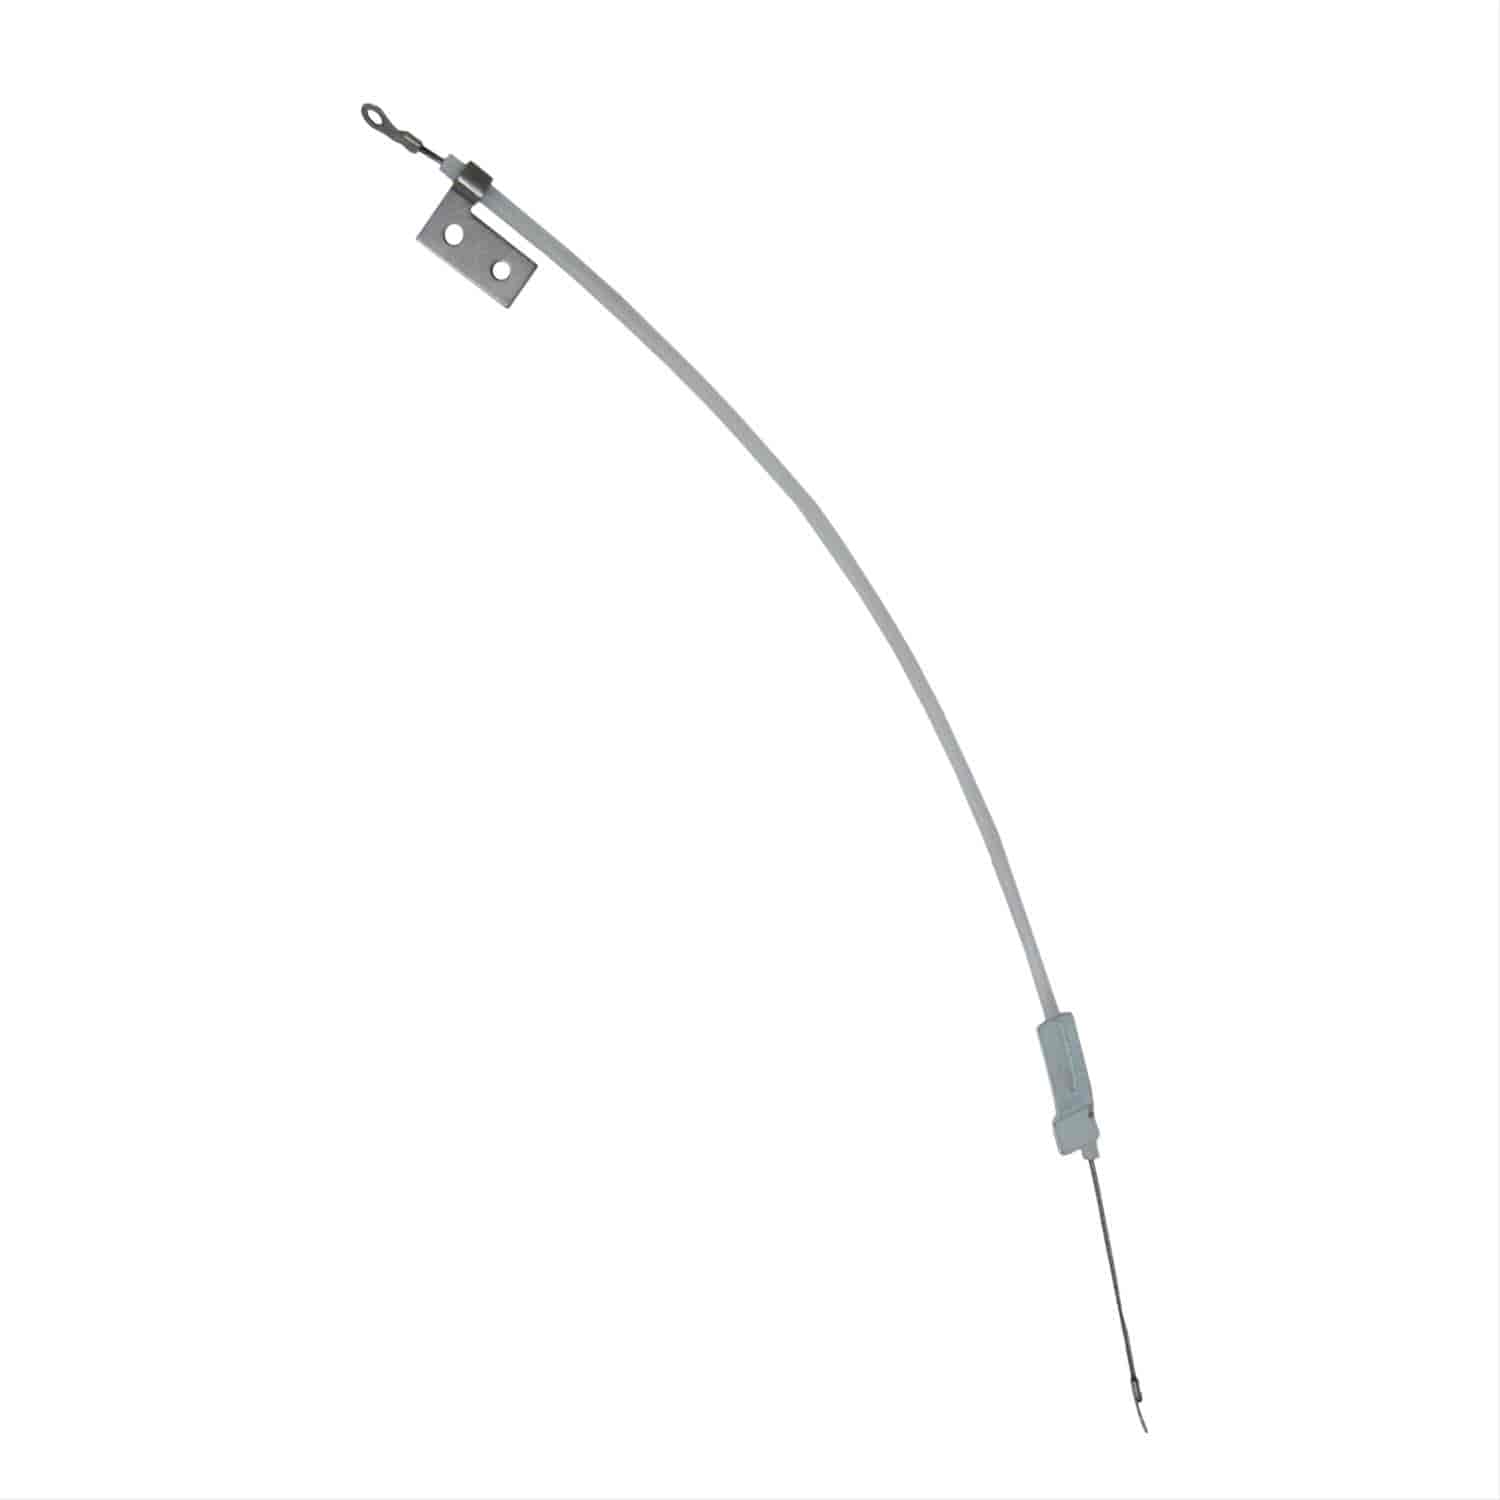 Megashifter Indicator Cable For Use With 130-80680 and 130-80690